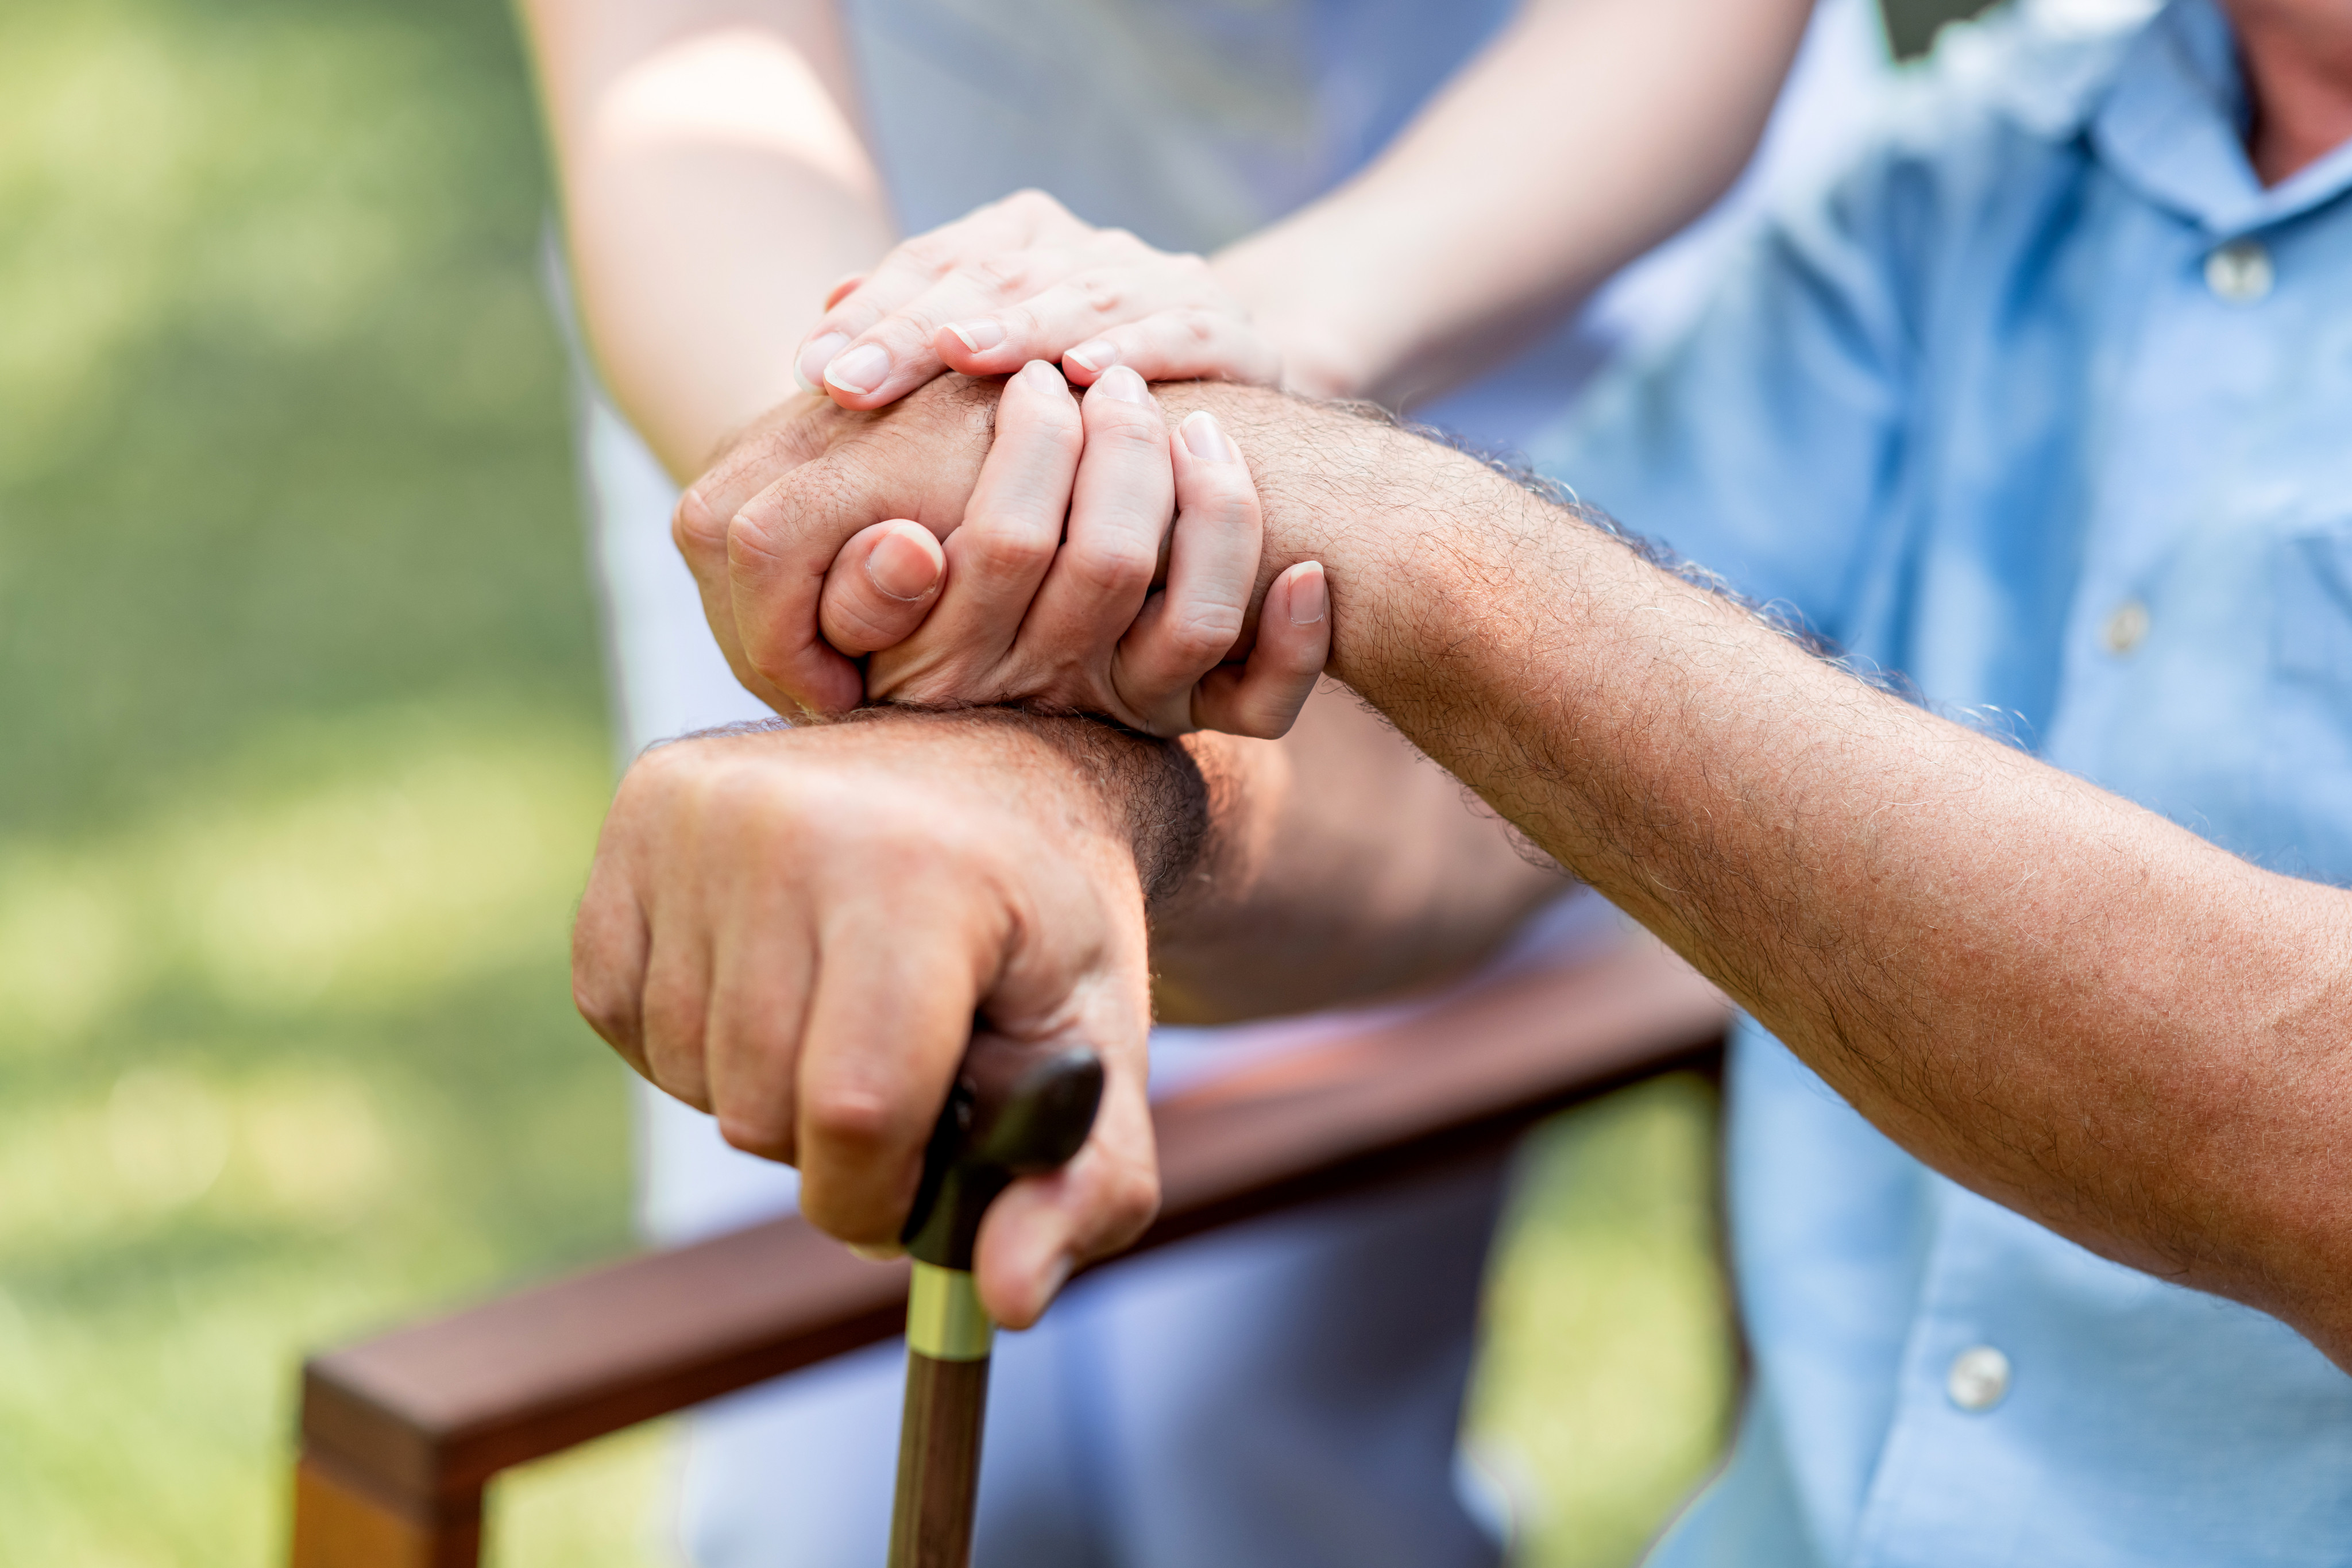 The Hong Kong Welfare Society has recorded a drop in its well-being score for the city. One key issue to arise was the plight of those caring for sick, disabled or elderly family members.  Photo: Shutterstock